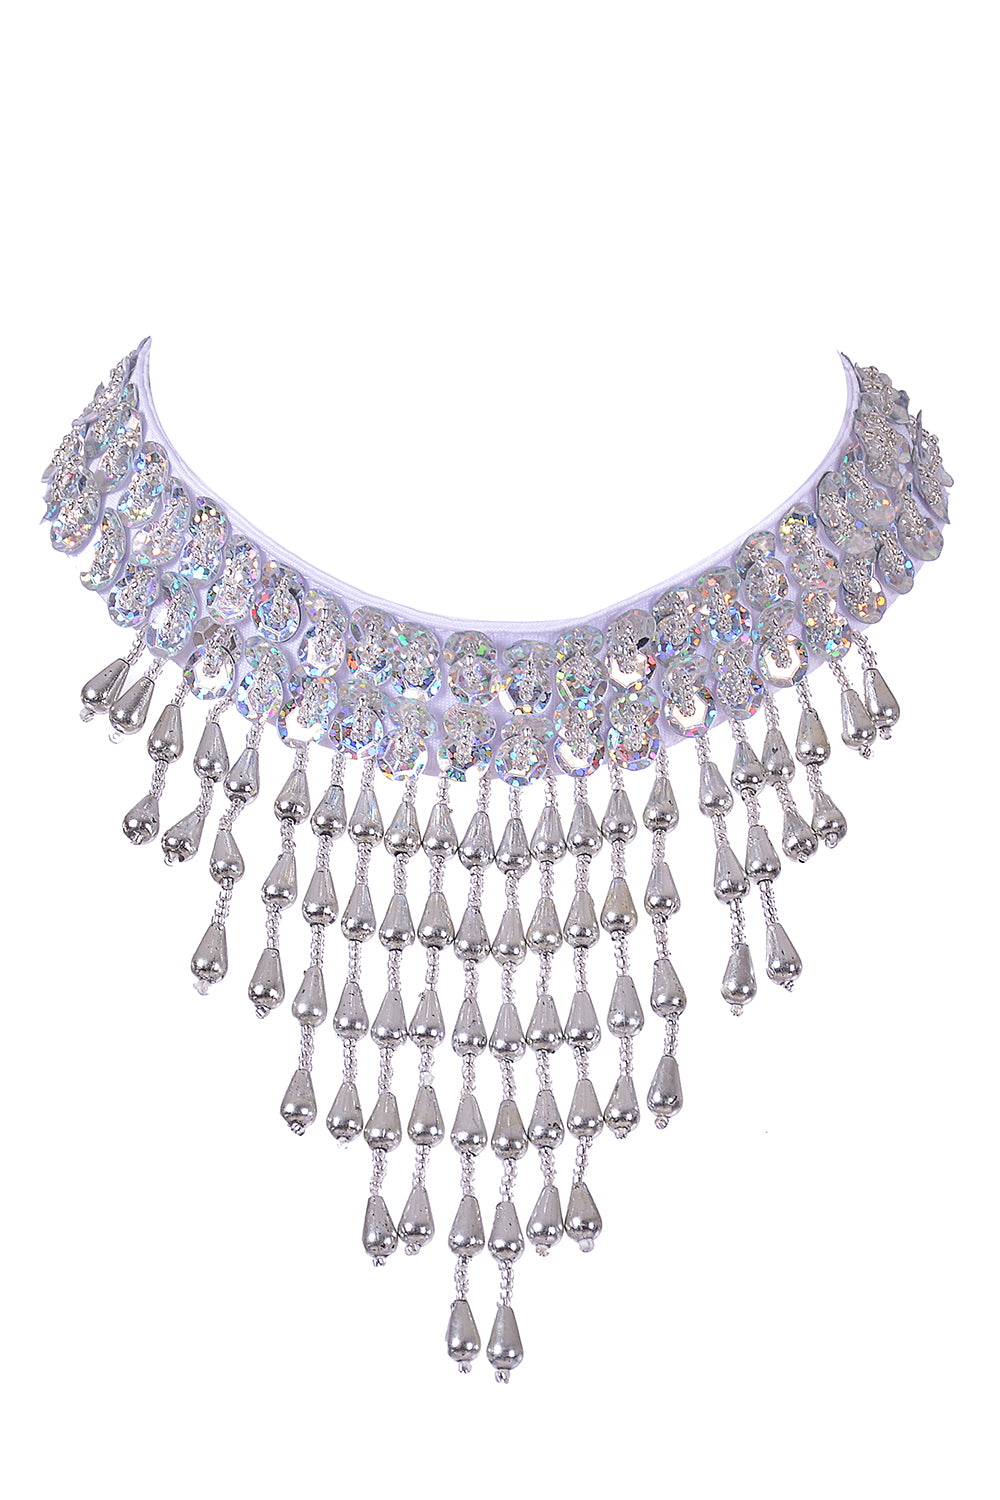 Hand Stitched Sequin Choker/Necklace - Moonlight